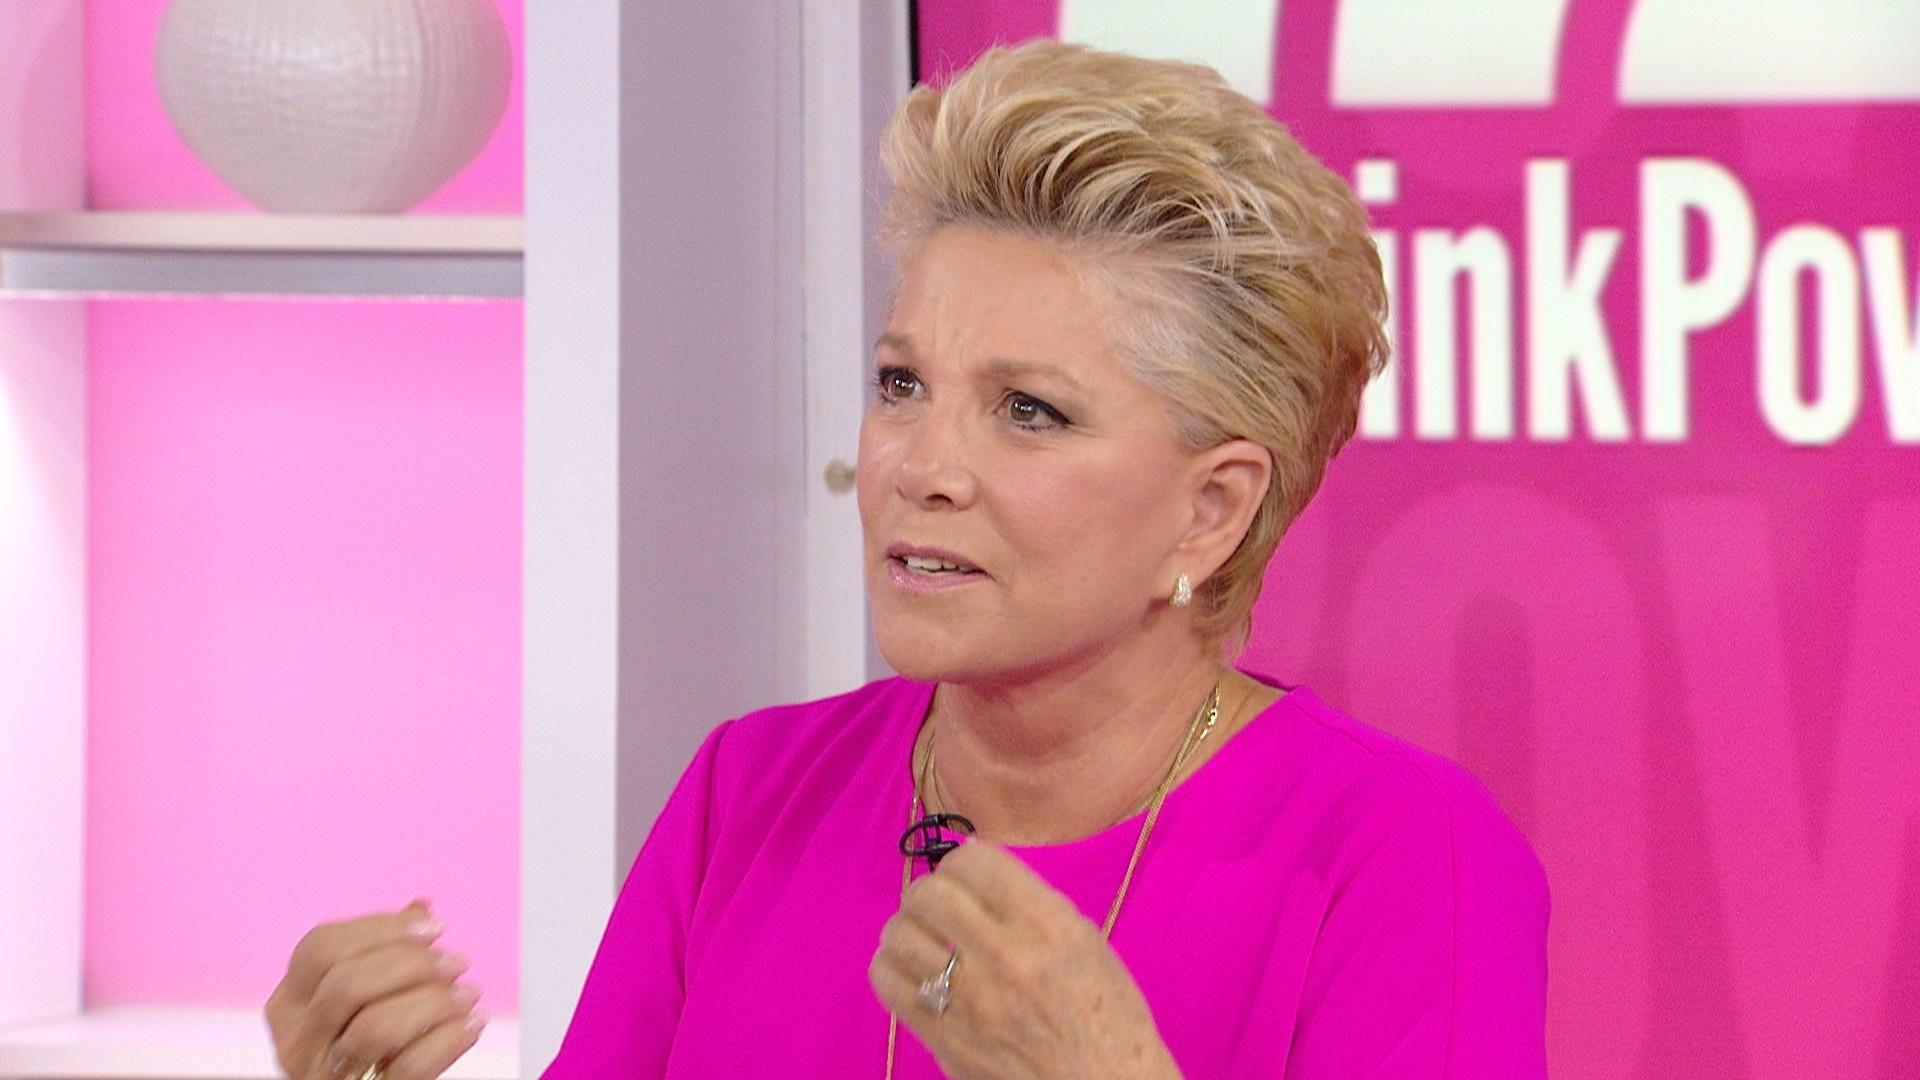 Pink Power TODAY: Joan Lunden talks to Hoda Kotb about breast cancer.